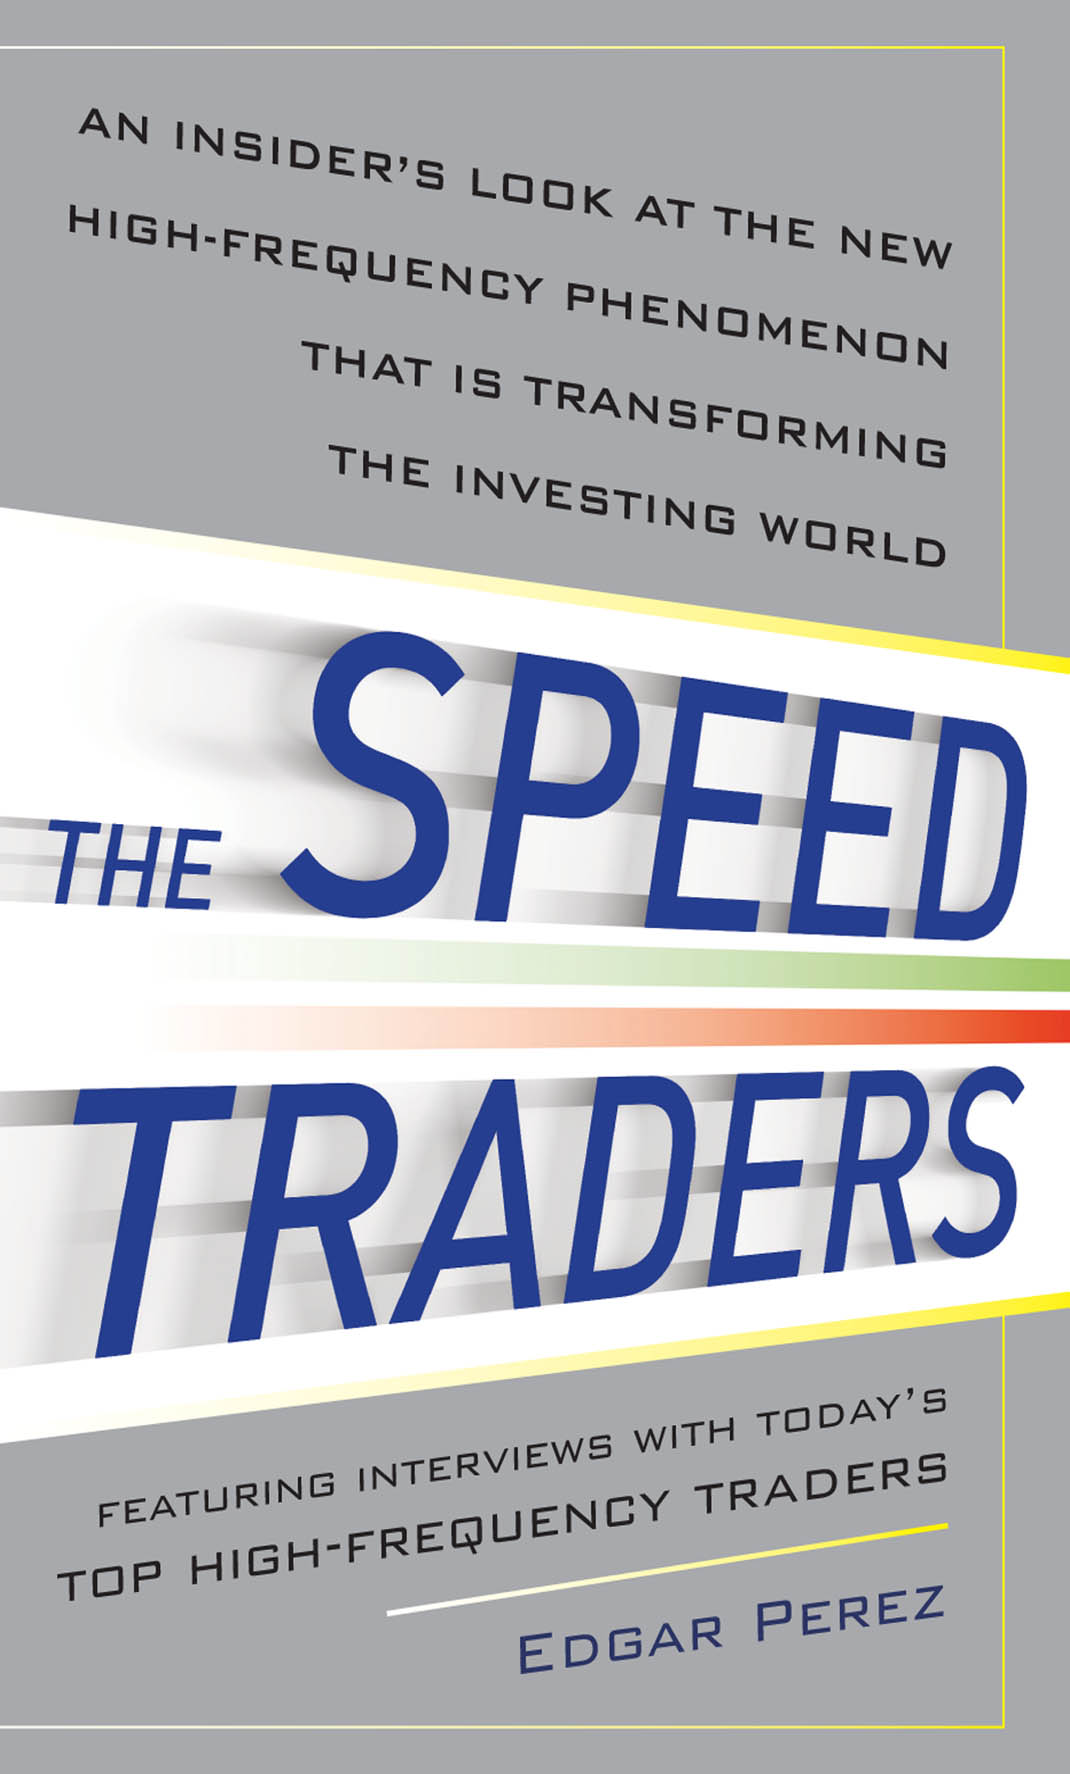 The Speed Traders